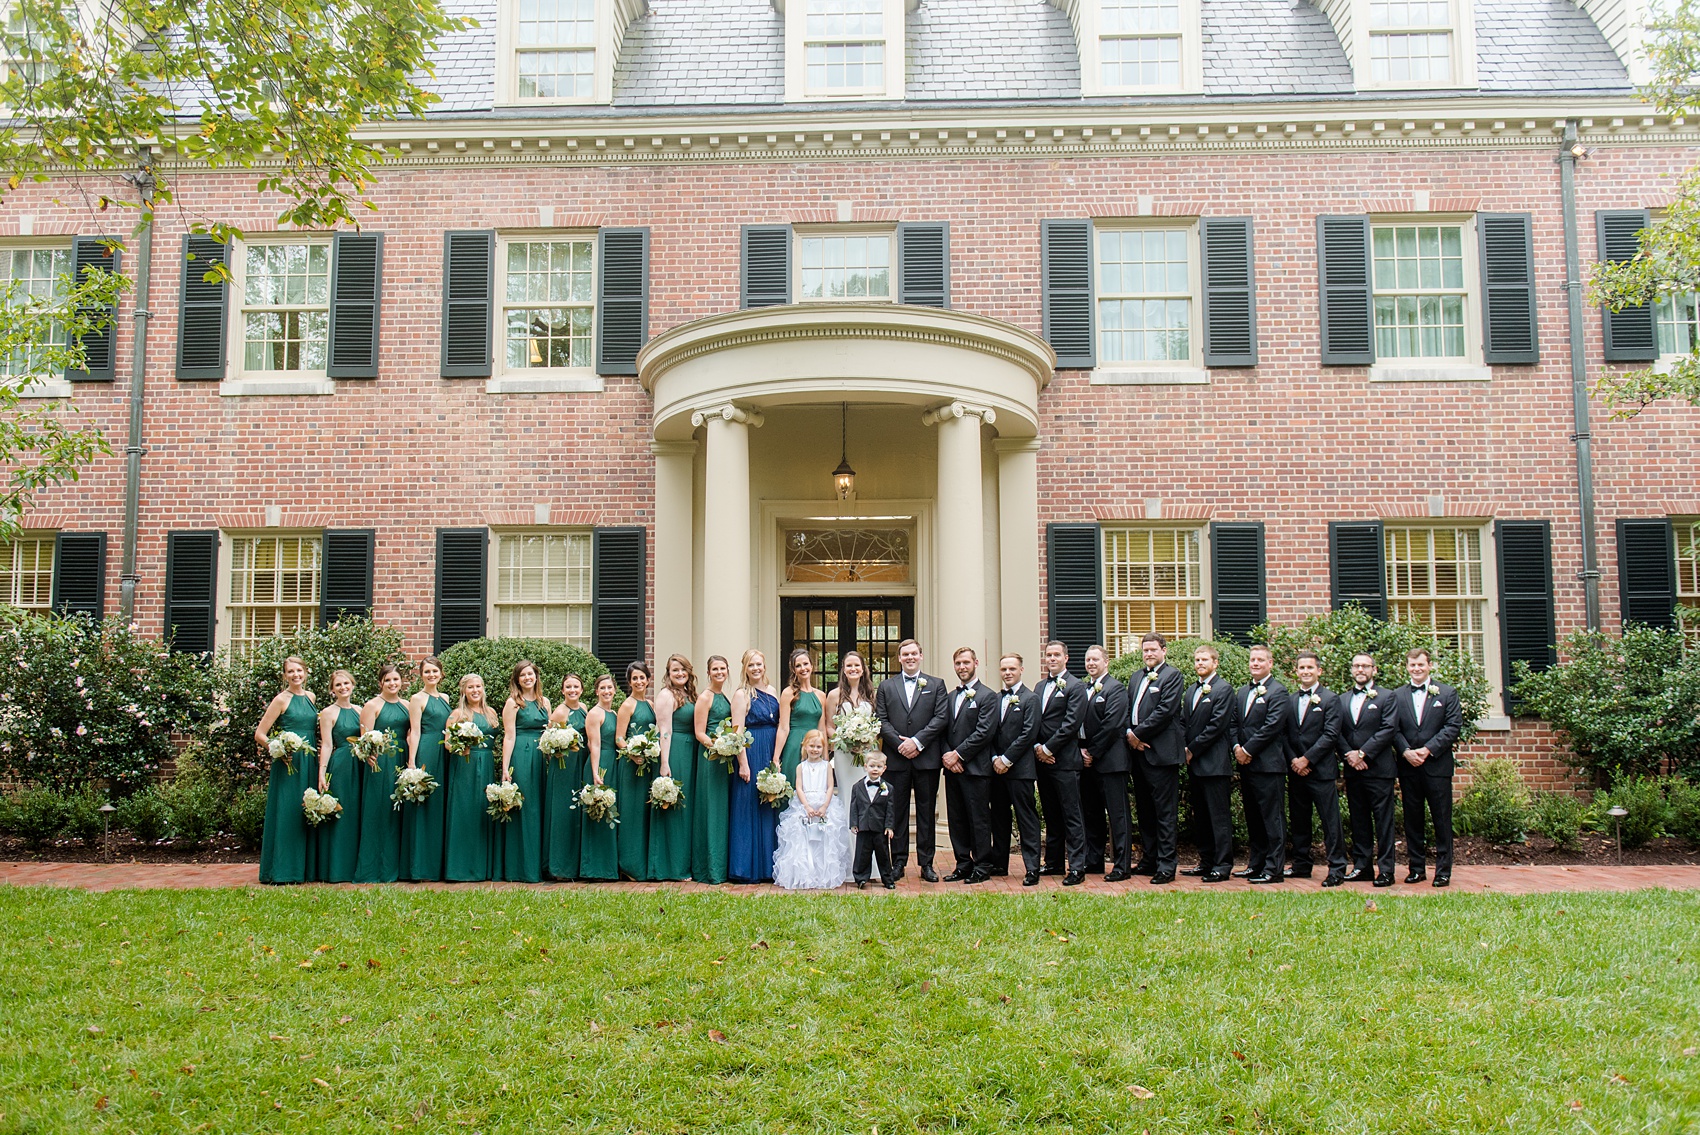 Photos of a fall wedding at The Carolina Inn, in Chapel Hill North Carolina, by Mikkel Paige Photography. This event venue doubles as a hotel for guests, who can enjoy a reception indoors or outdoors. The bridesmaids wore long green gowns and carried white bouquets with eucalyptus greenery.Click through to see inspiration from the entire wedding! Planner: @asouthernsoiree, Flowers by The Flower Cupboard #thecarolinainn #ChapelHillWeddings #MikkelPaige #greenbridesmaids #bridalparty #weddingparty